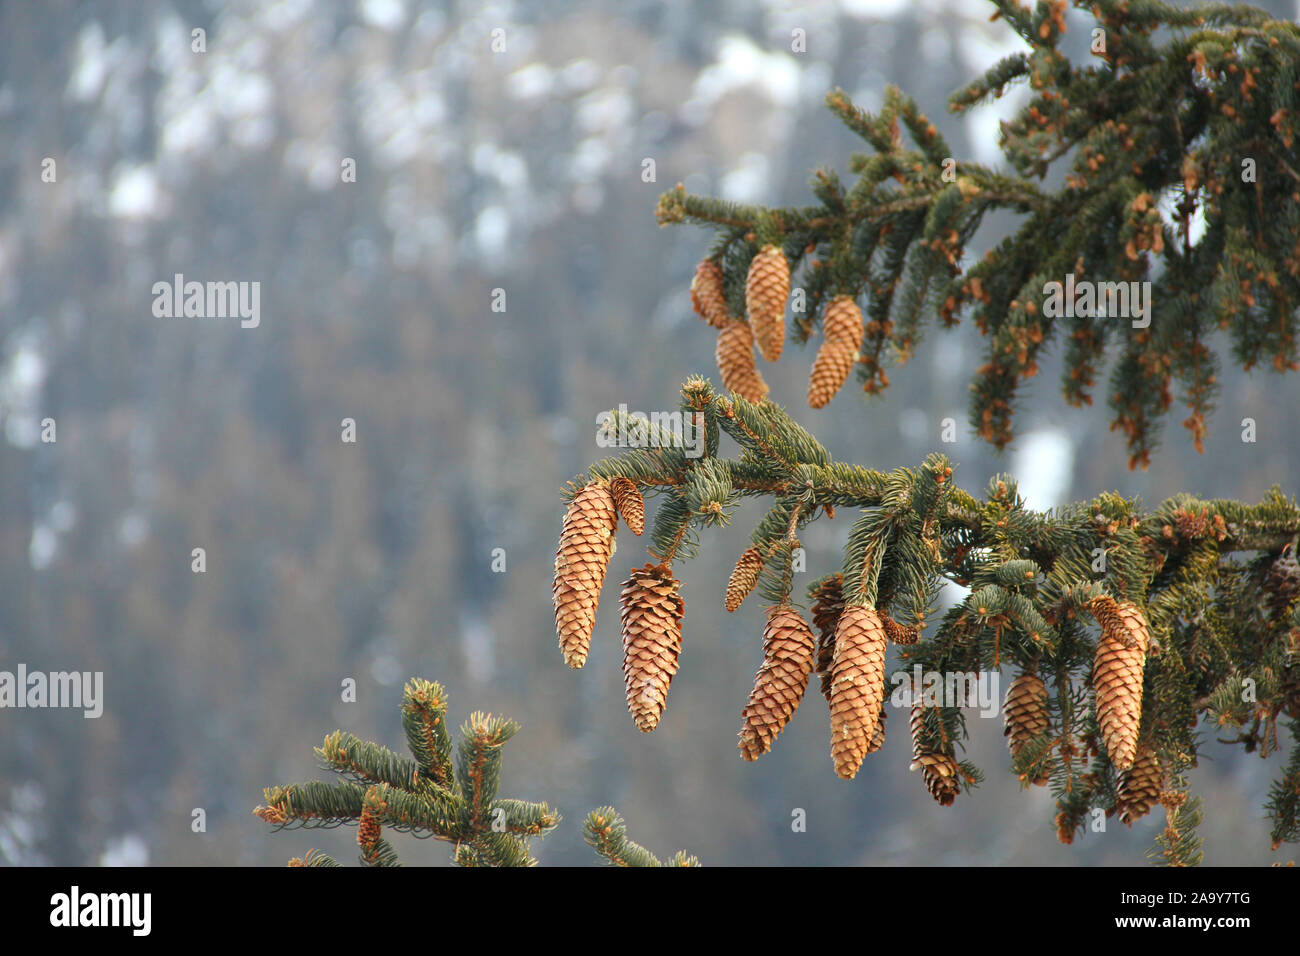 Noble fir and cones in winter mountains, Abies procera glauca fir nobilis Stock Photo